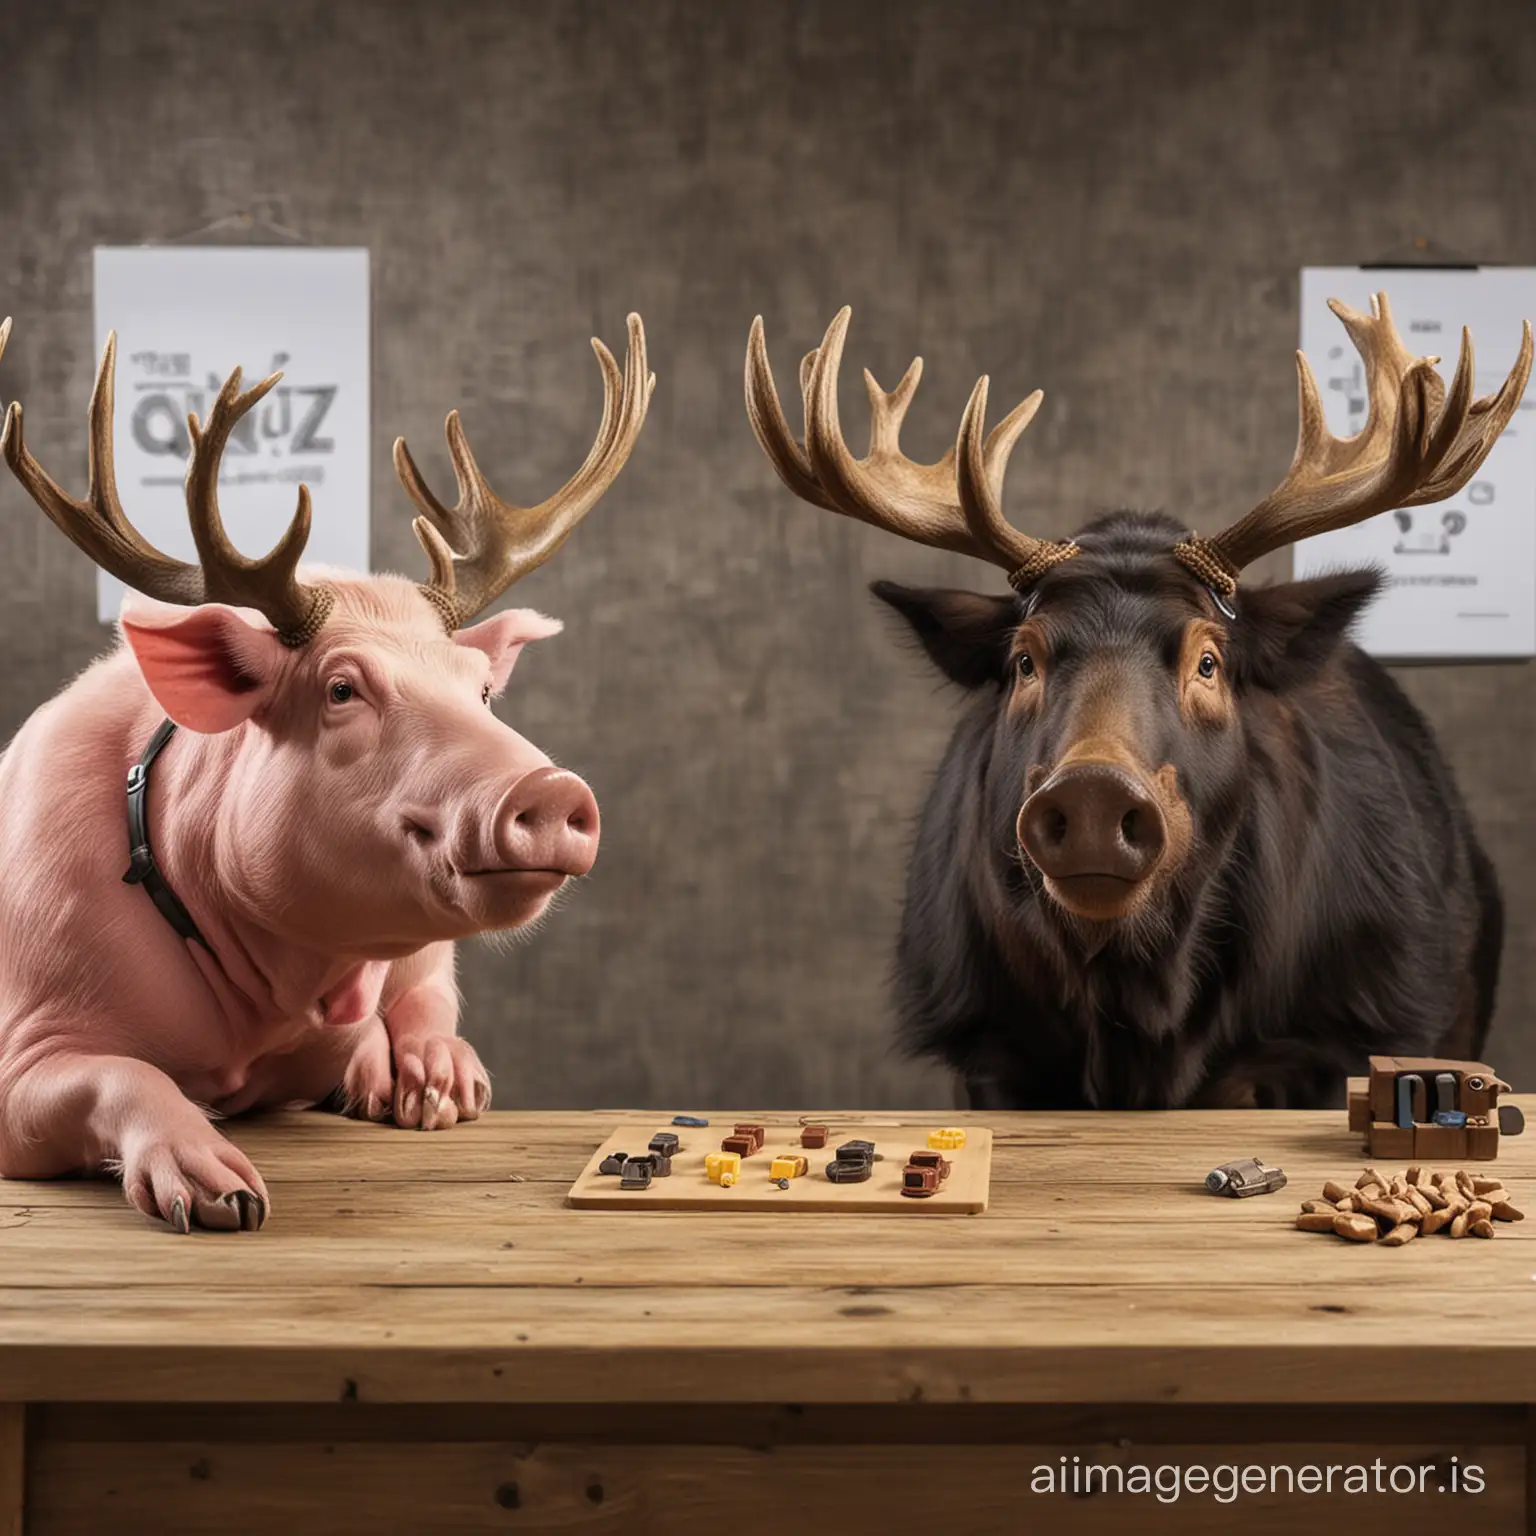 Crossbreed between moose with horns and pig, taking part in quiz show in game studio